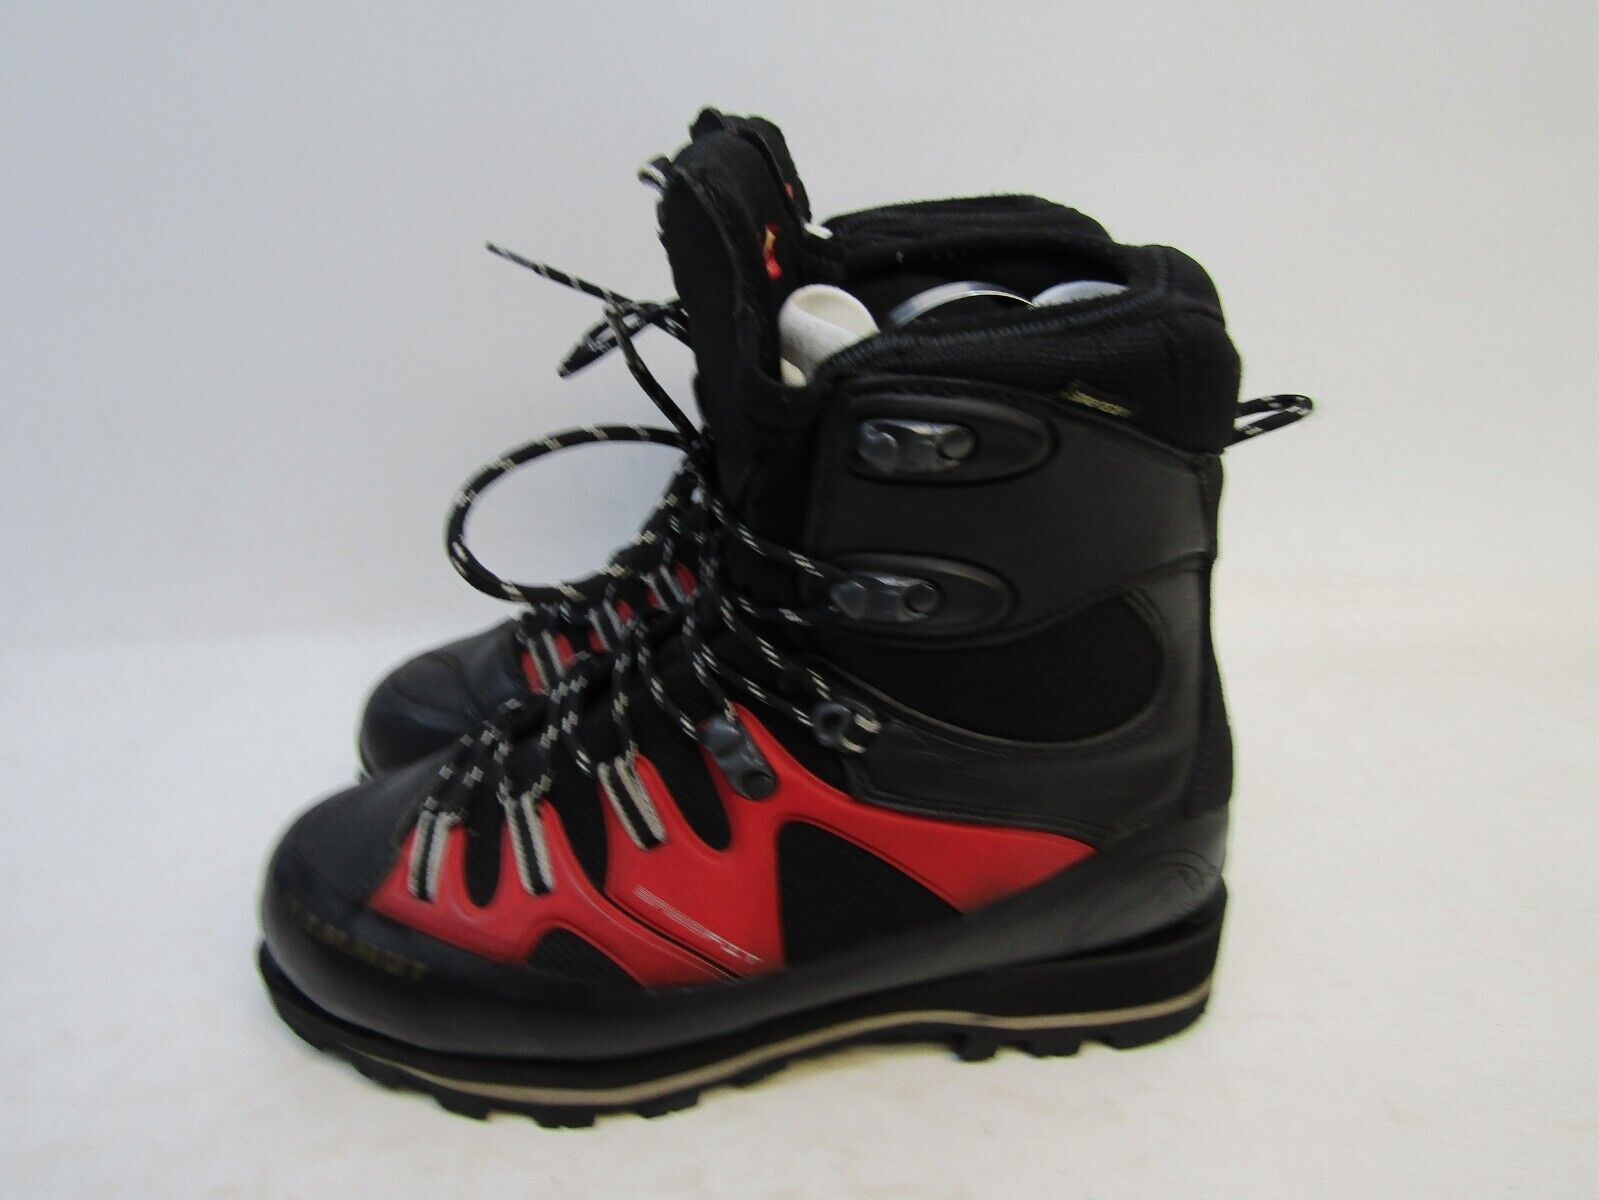 EUC Raichle Mammut Mens Size 8.5 US 41 EUR Black Red Mountaineering Hiking Boots